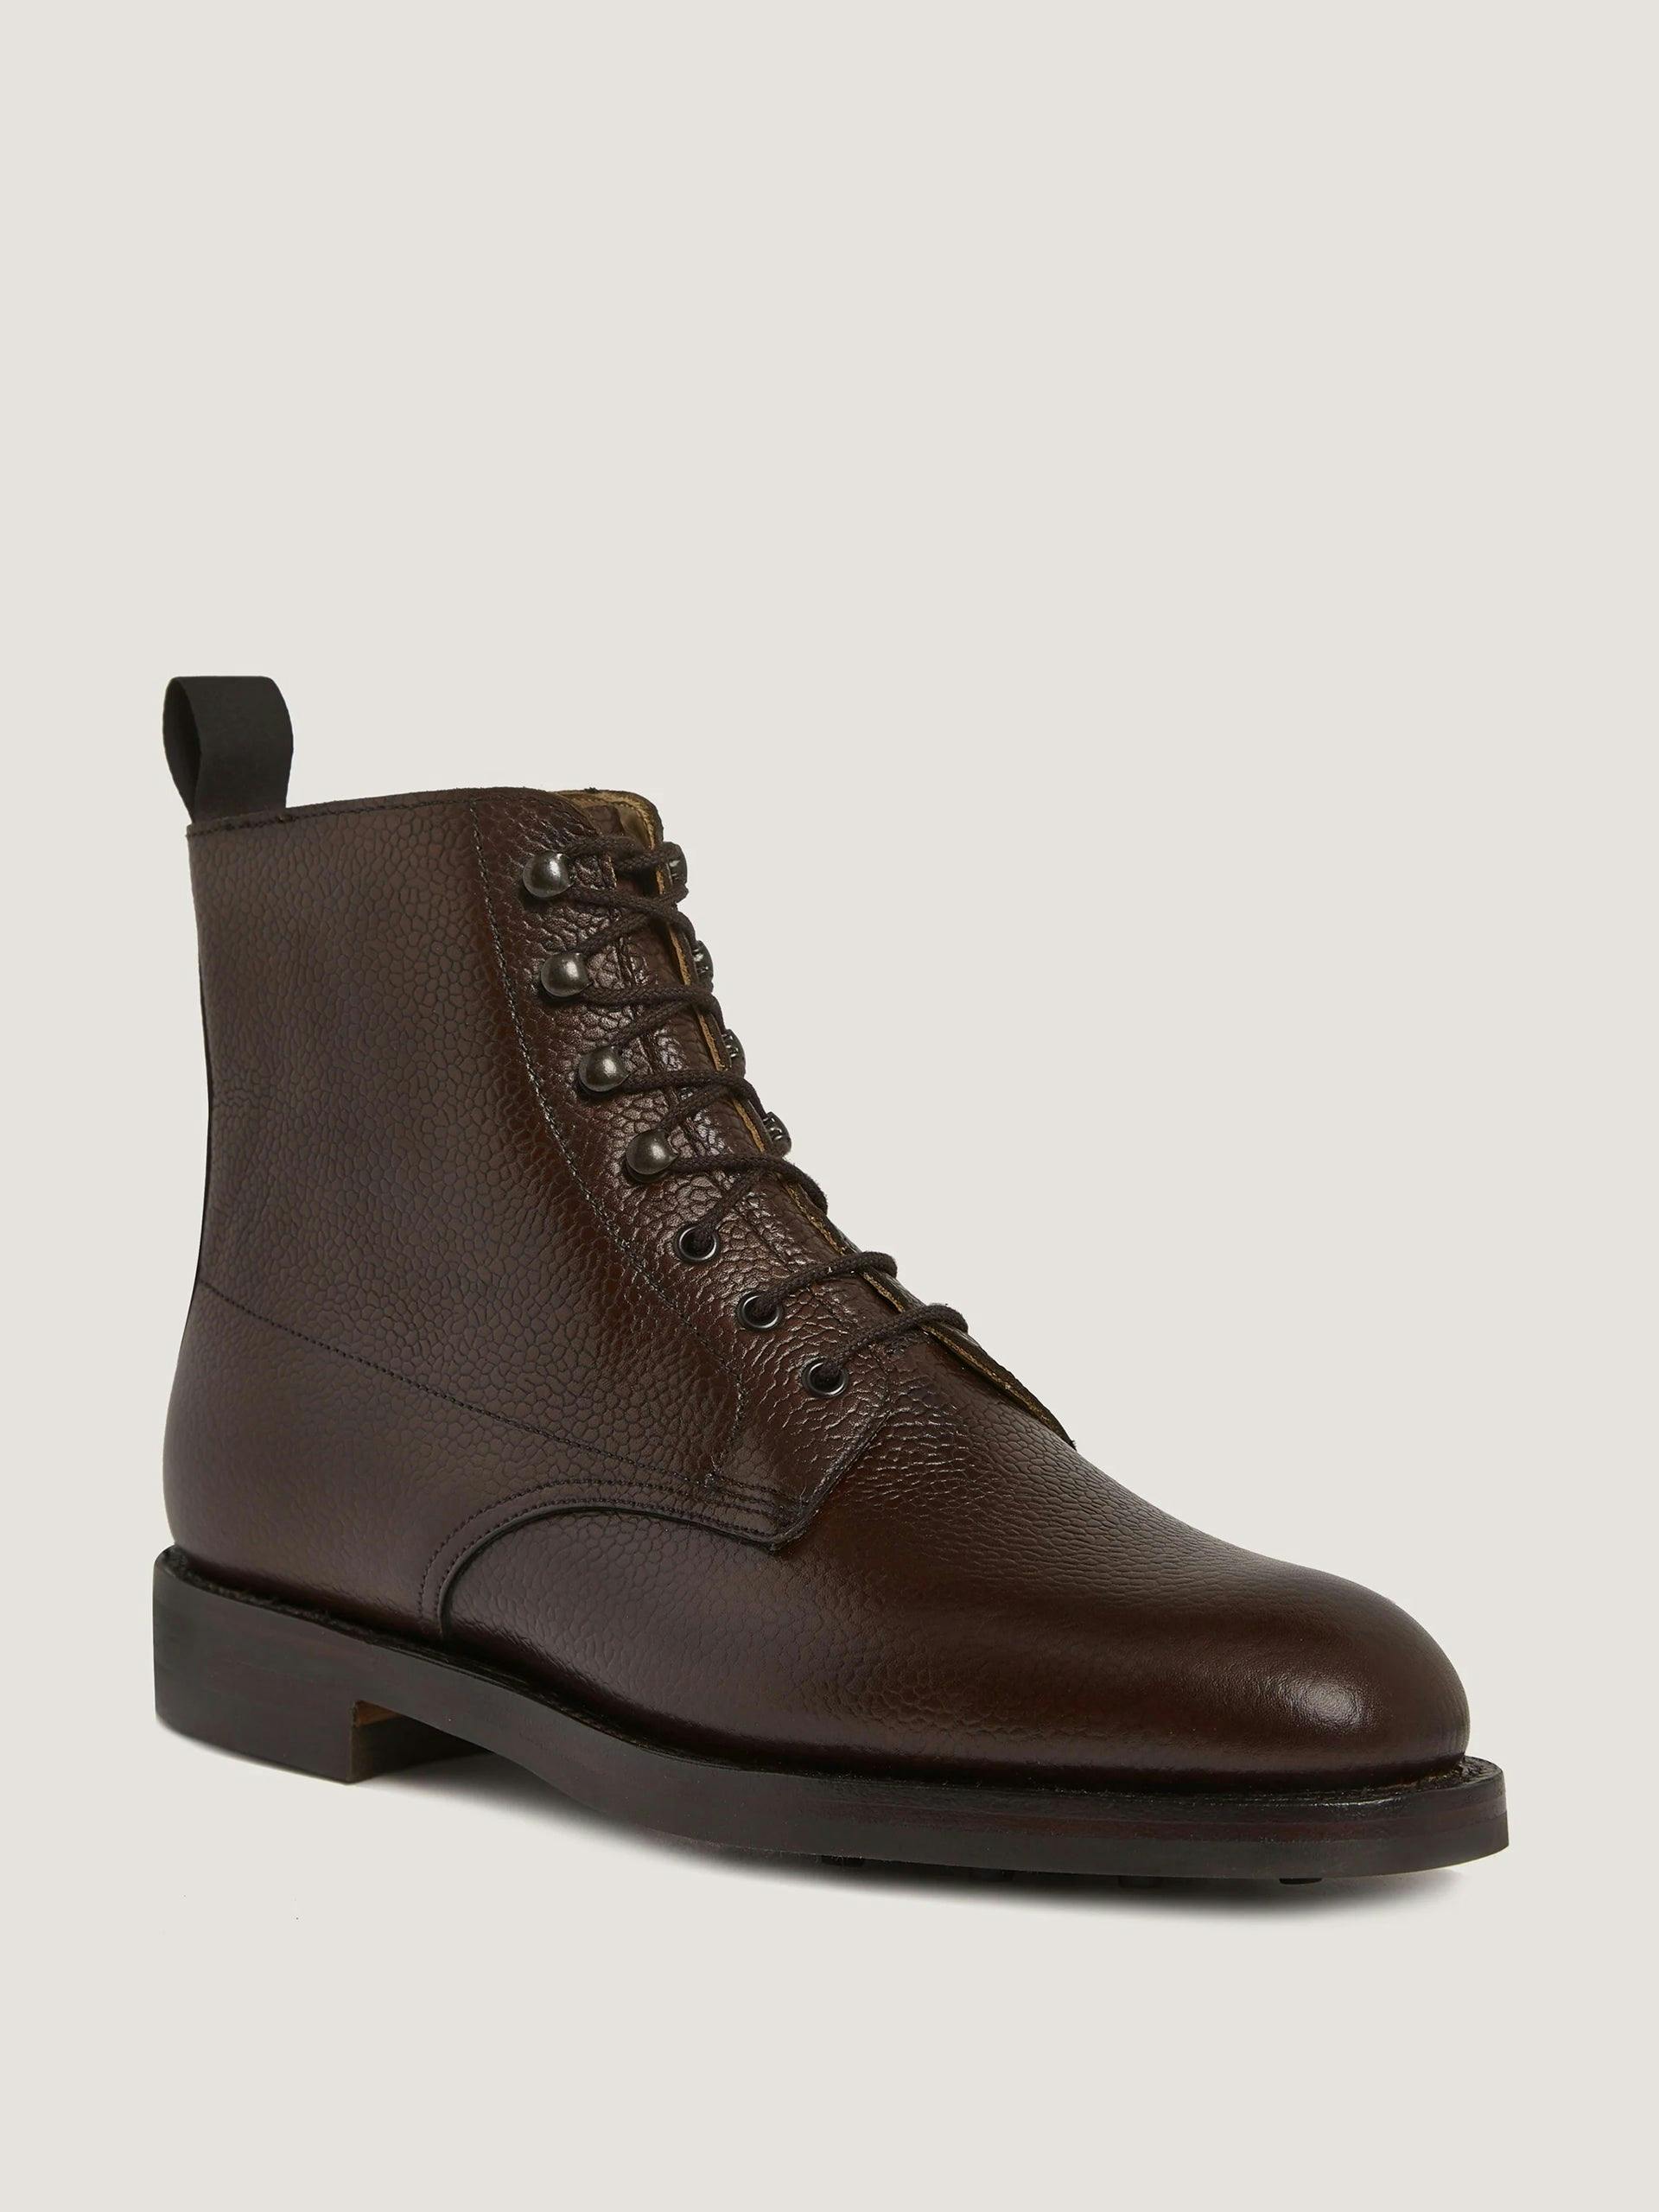 Grain leather ankle boot